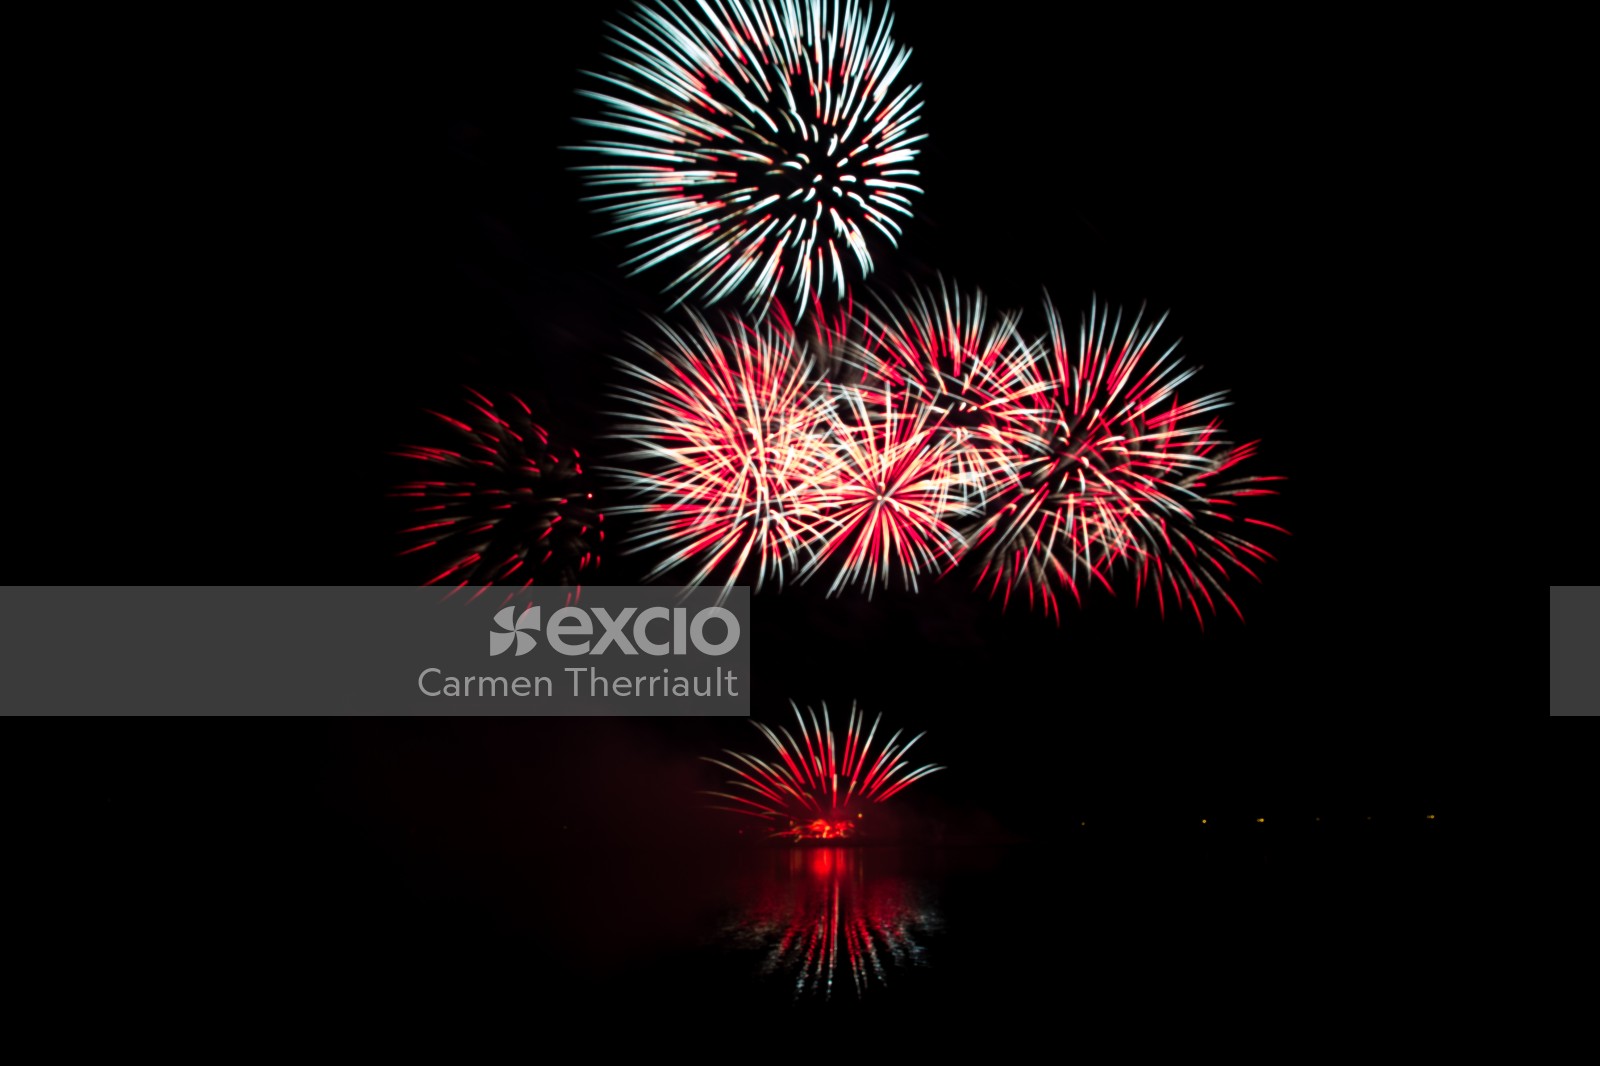 Red and white fireworks